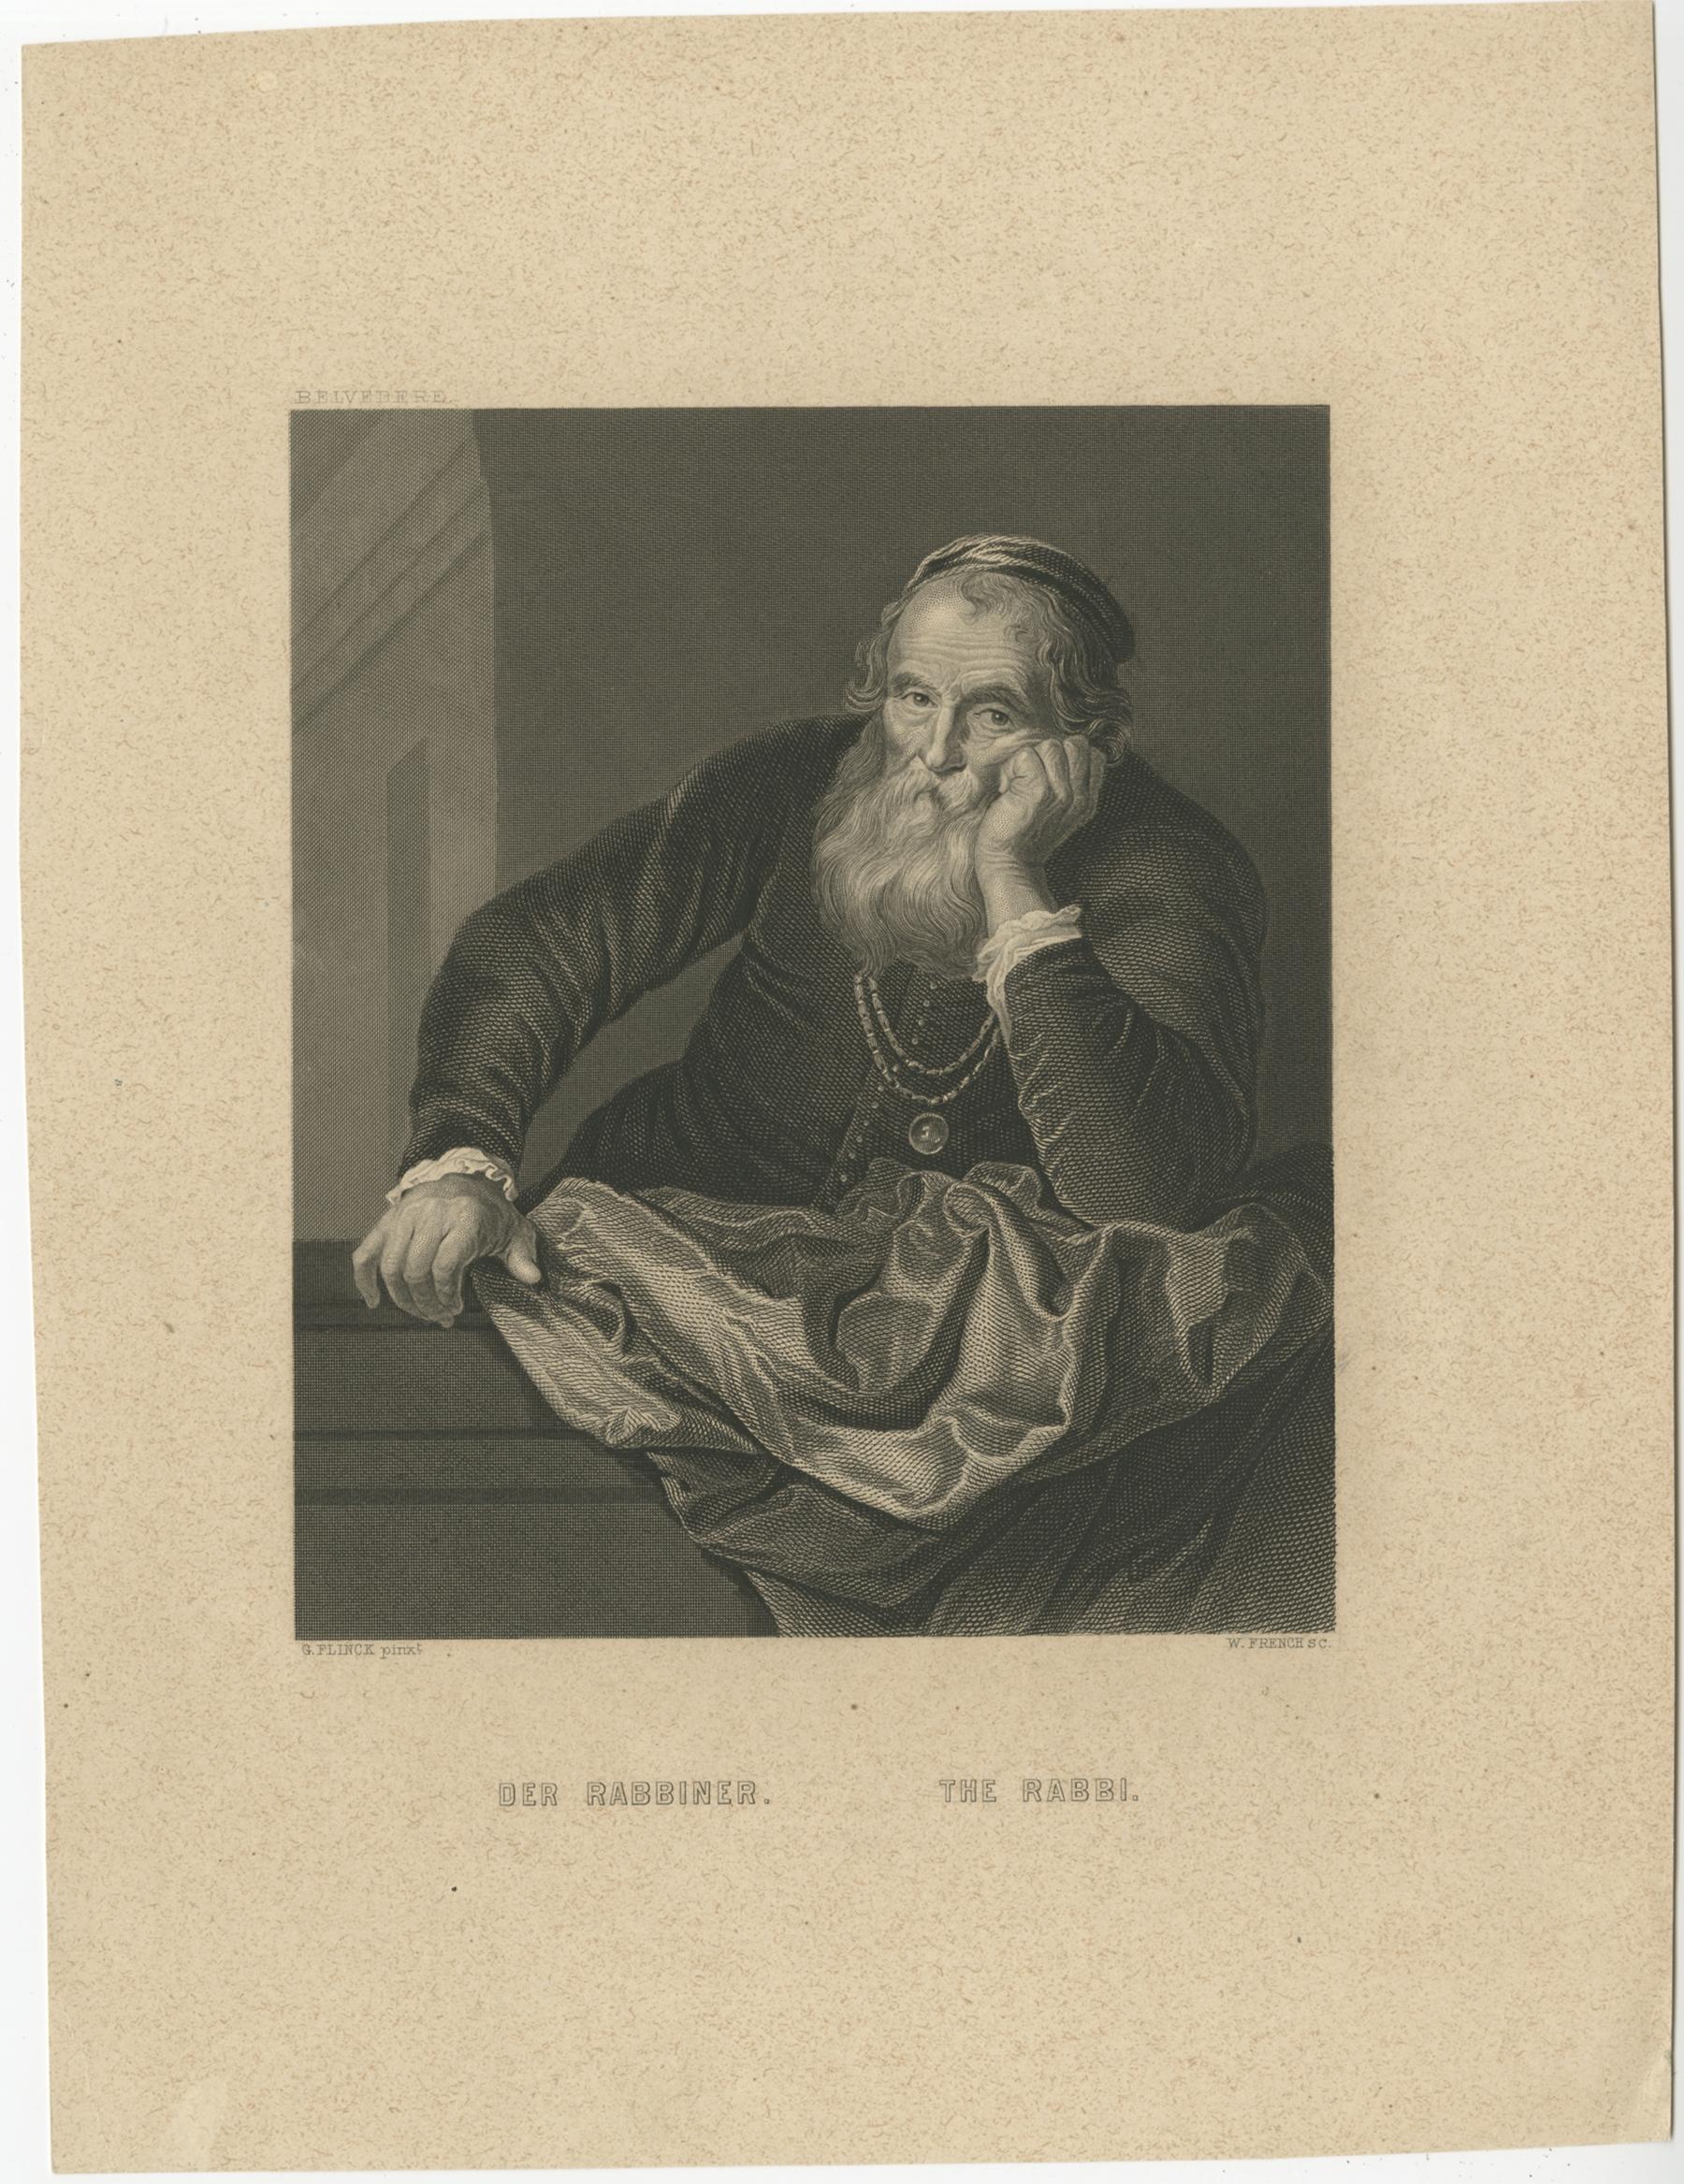 Description: Antique print titled 'Der Rabbiner - The Rabbi'. Original antique print of a rabbi. Published circa 1850. 

Artists and Engravers: Engraved by W. French after a painting by G. Flinck.

Condition: Fair, age-related toning. Strong